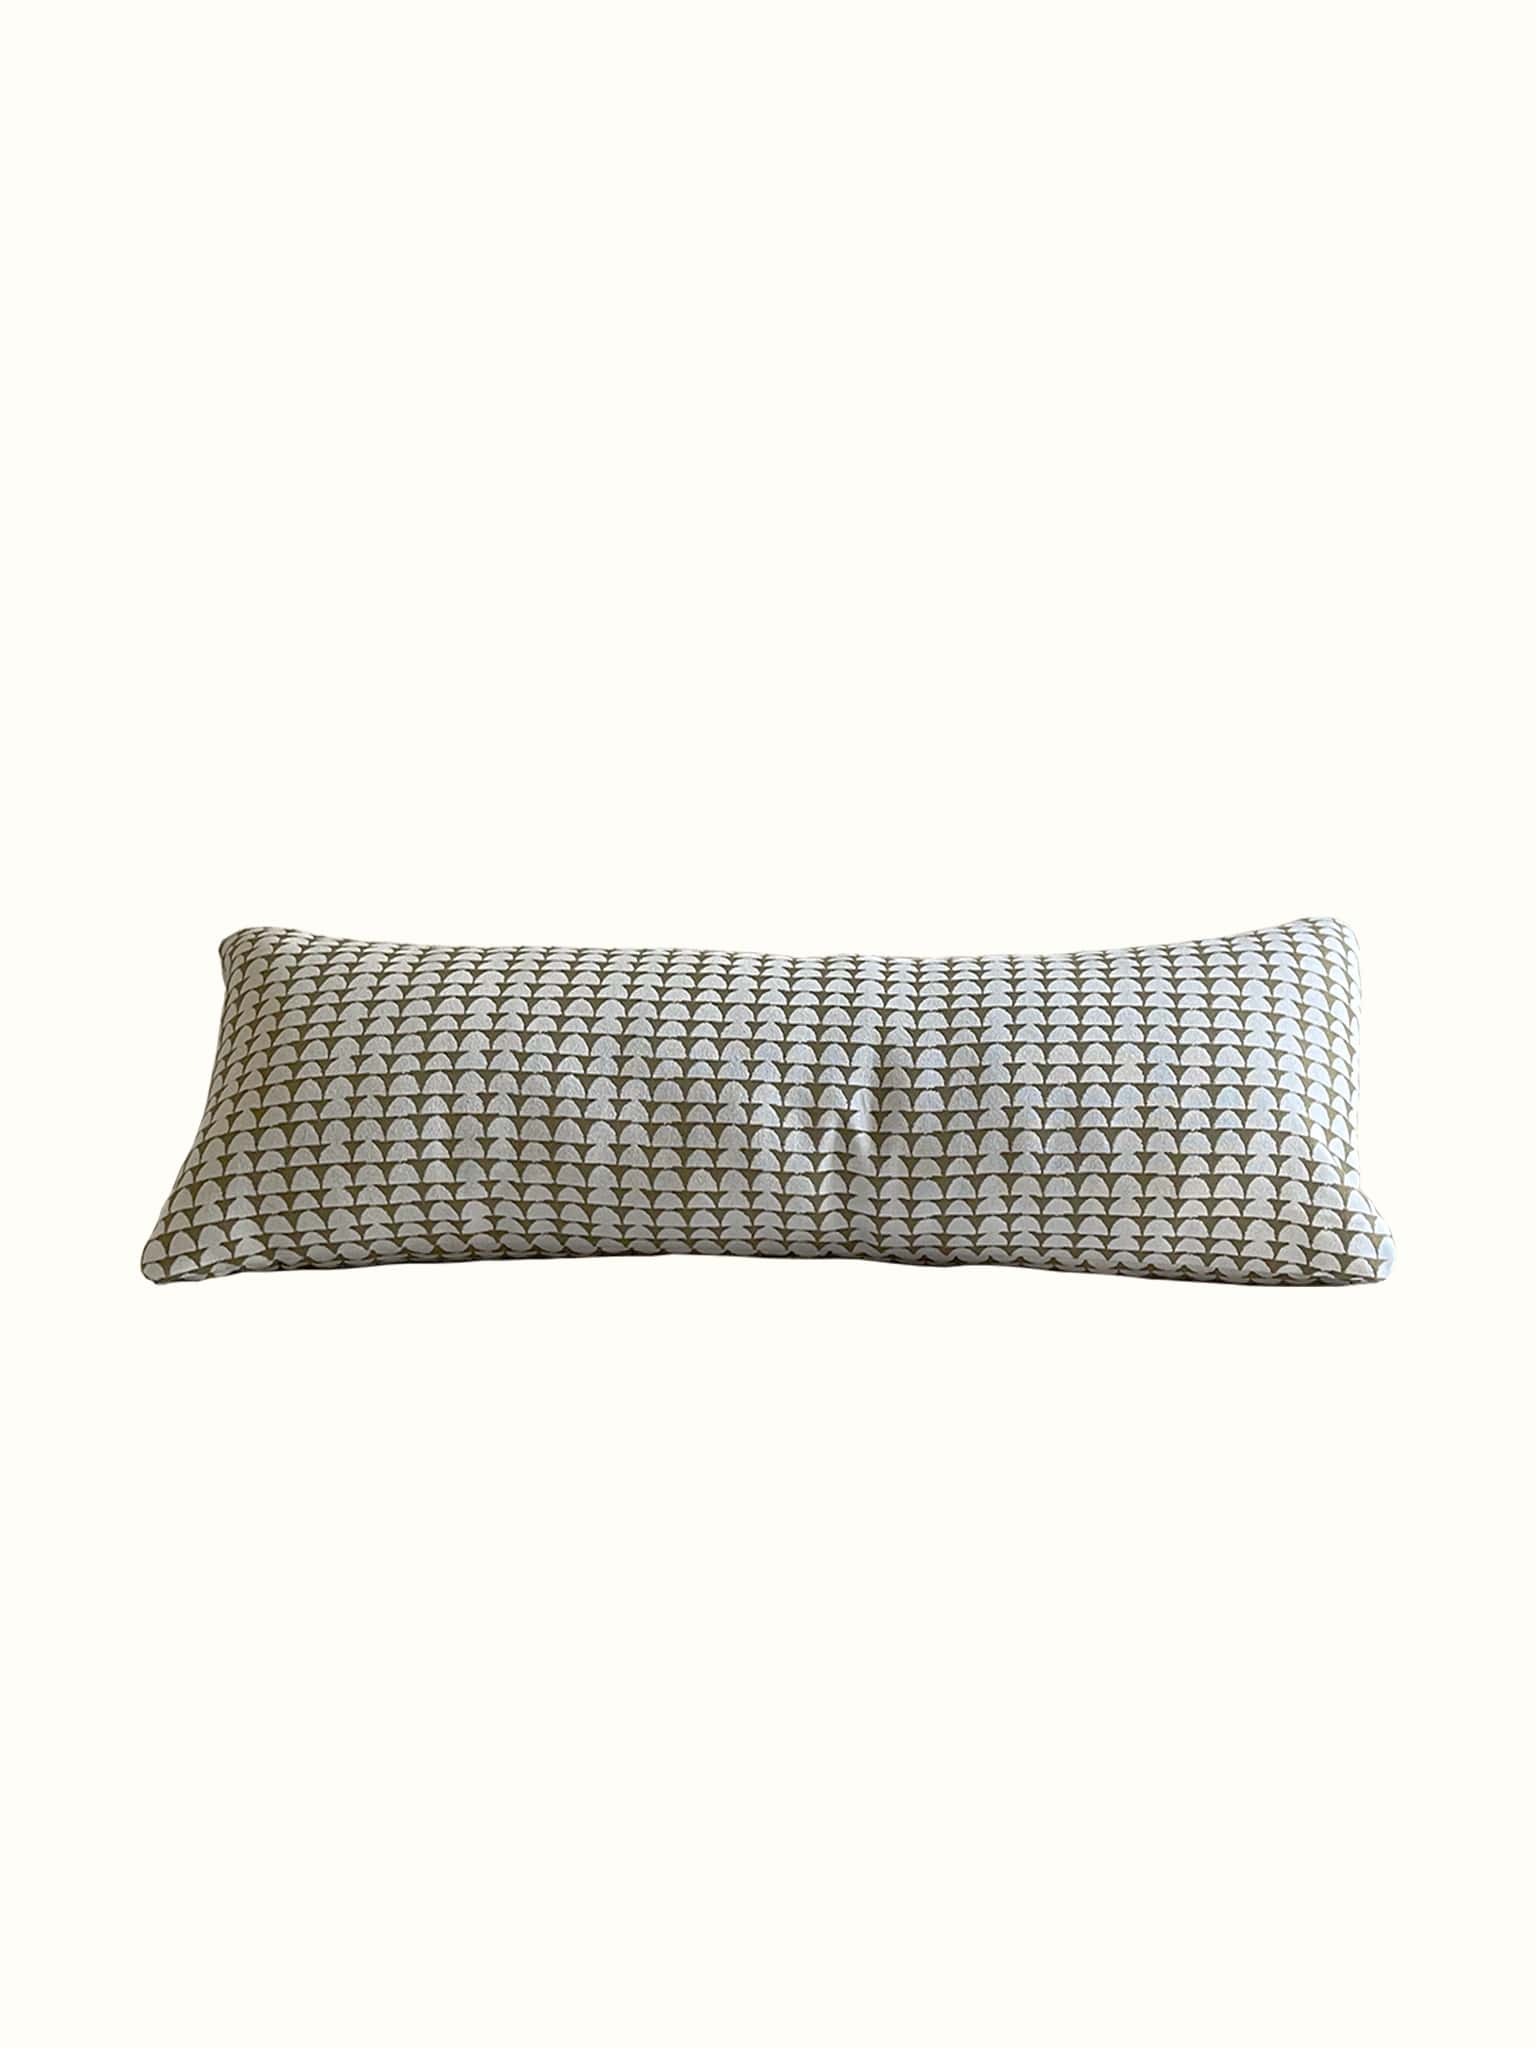 Semi-circle geometric patterned lumbar pillow in olive yellowish green at Cielle Home